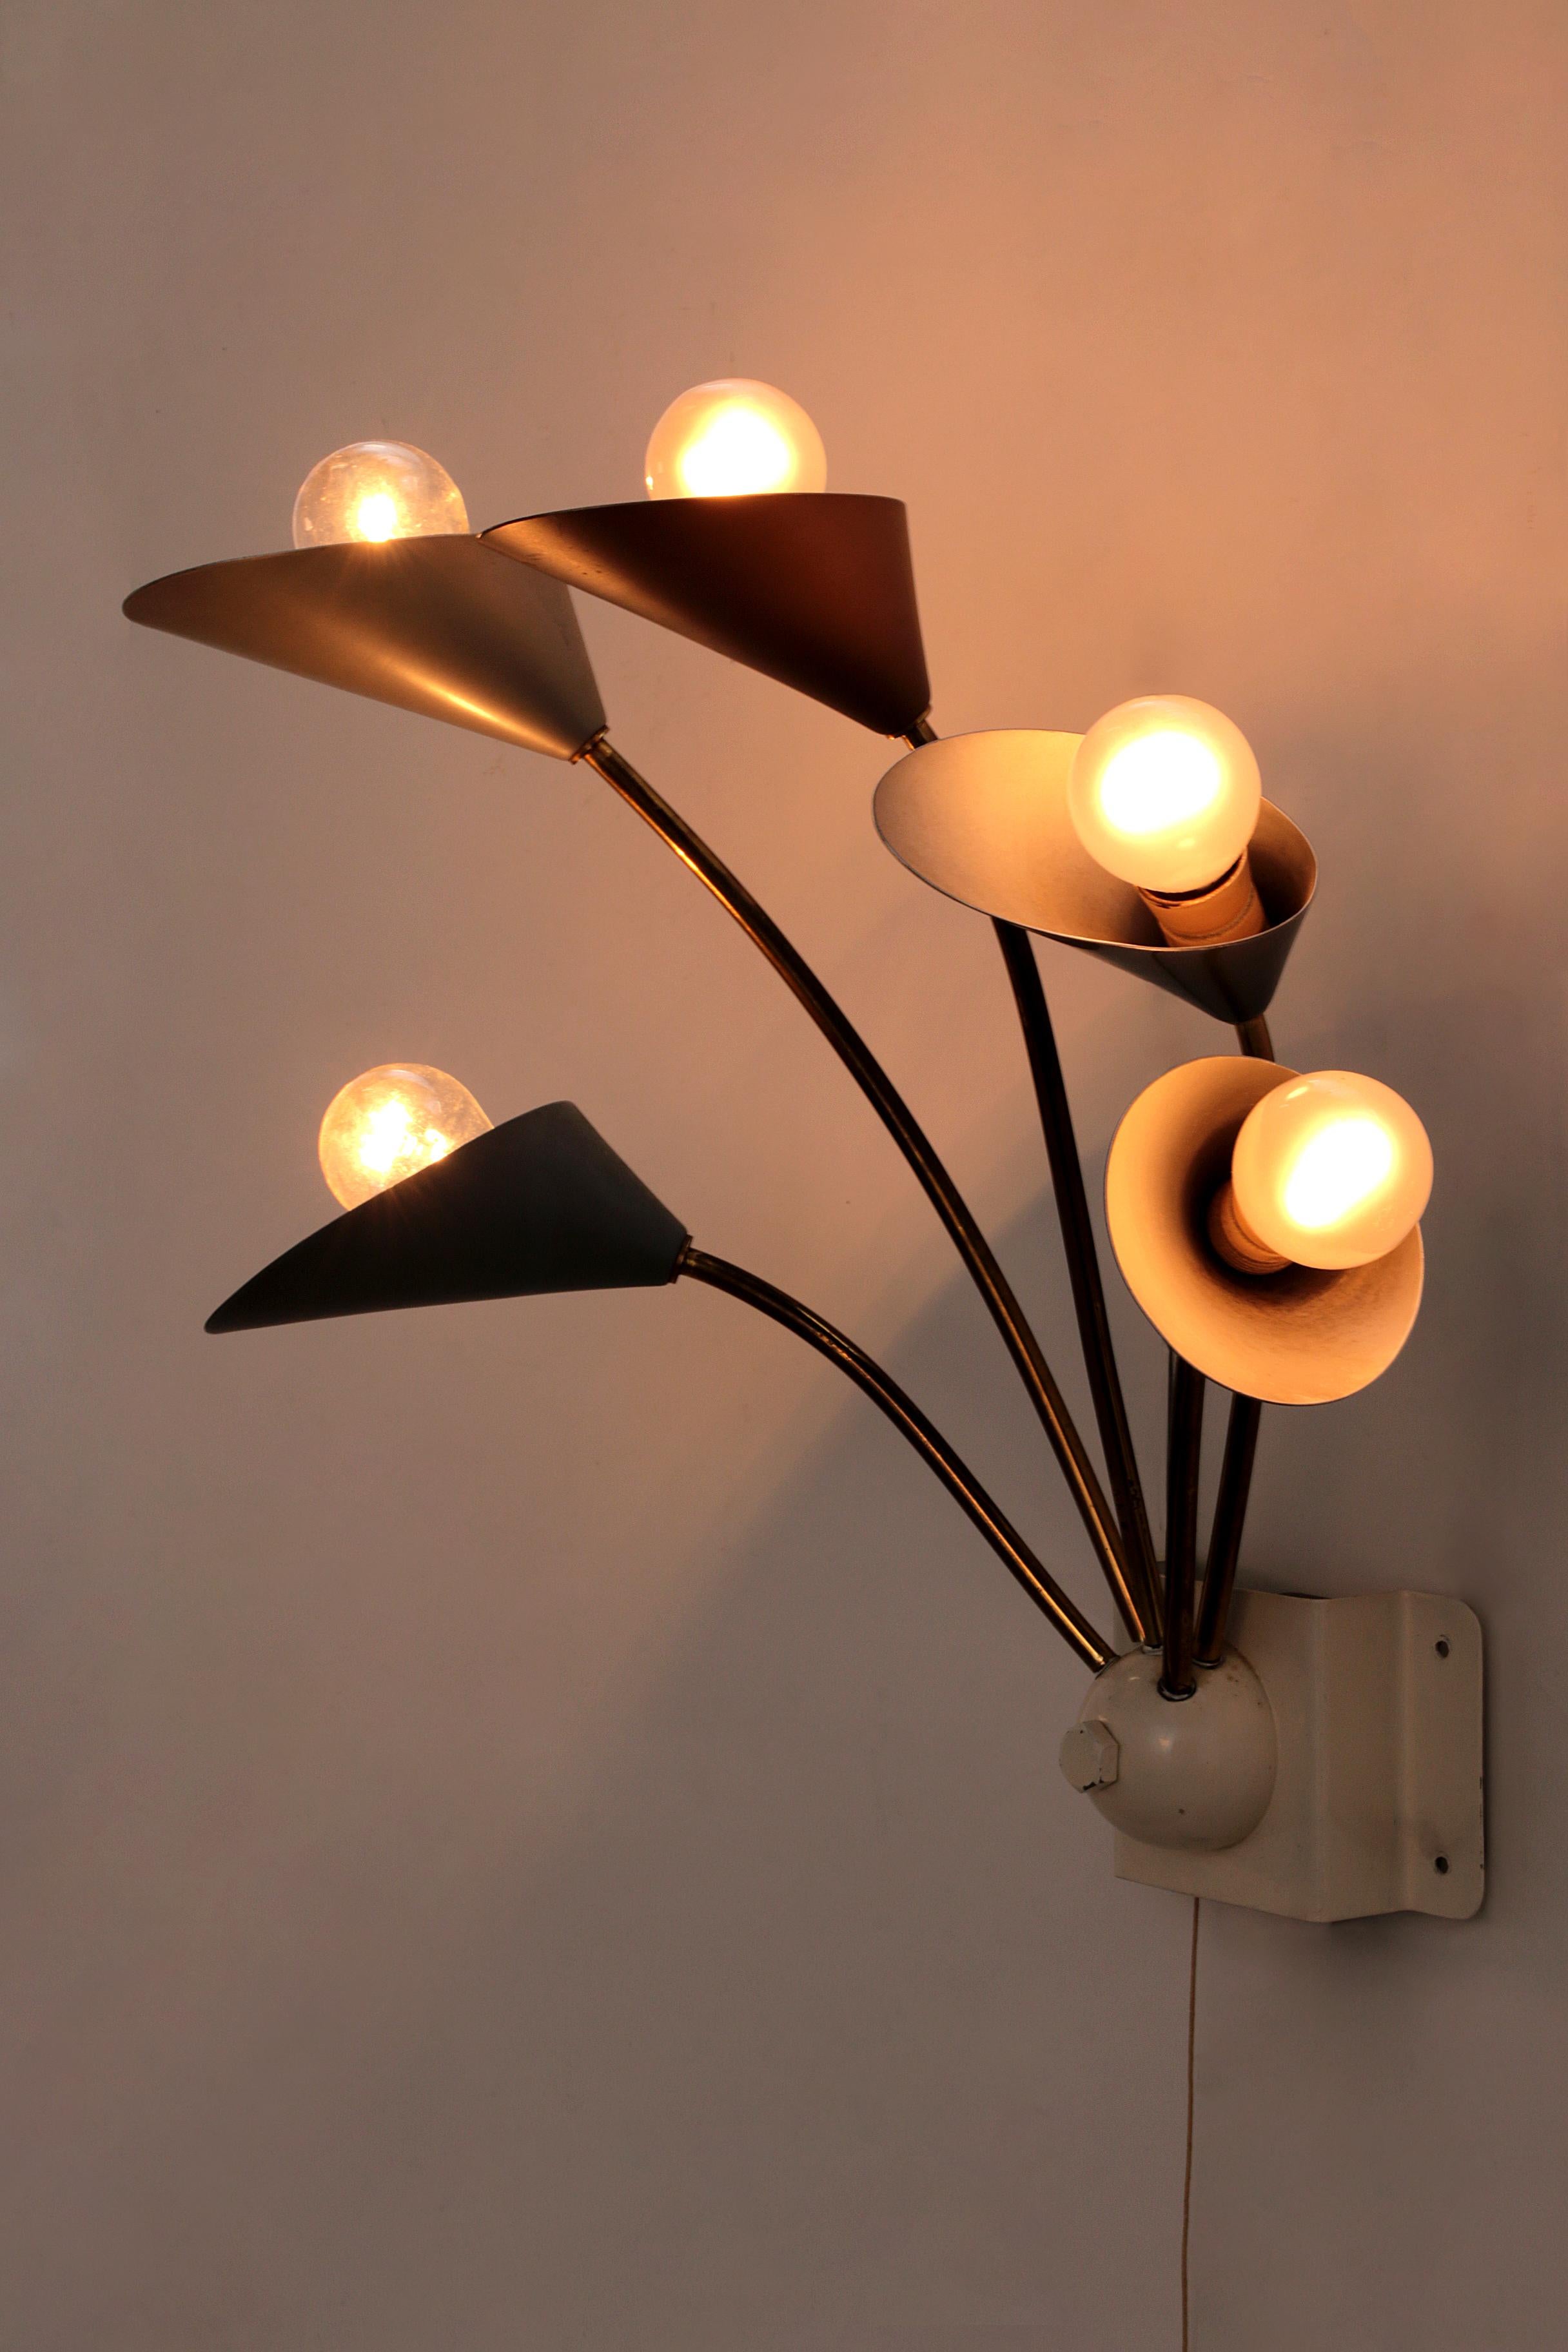 Mid-20th Century Vintage Wall Lamp with 5 Lights - Brass Metal, 1960 Denmark For Sale